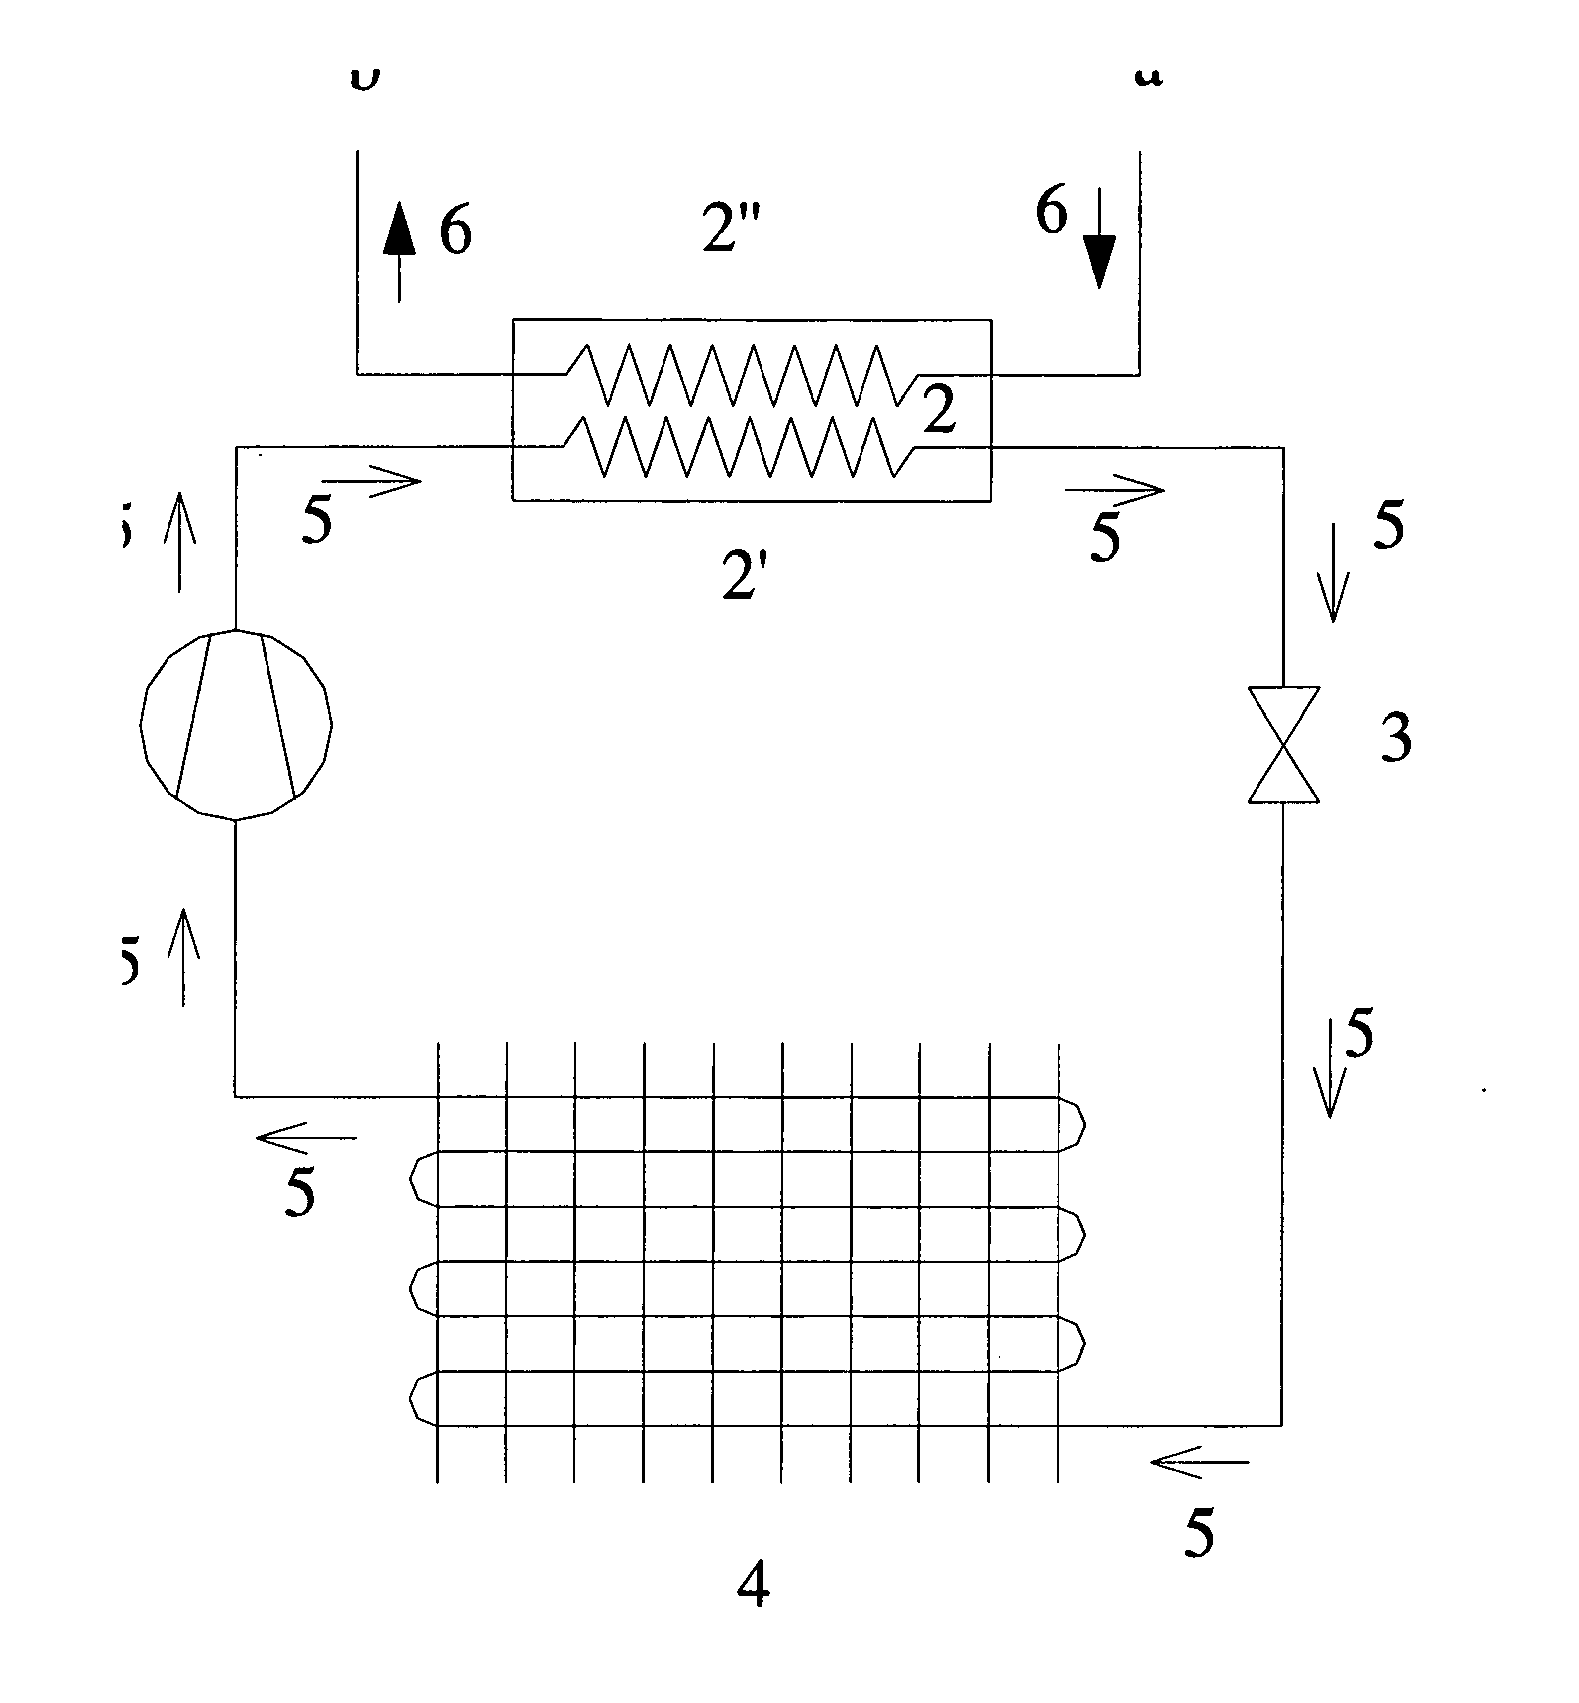 Hydrofluorocarbon refrigerant compositions for heat pump water heaters